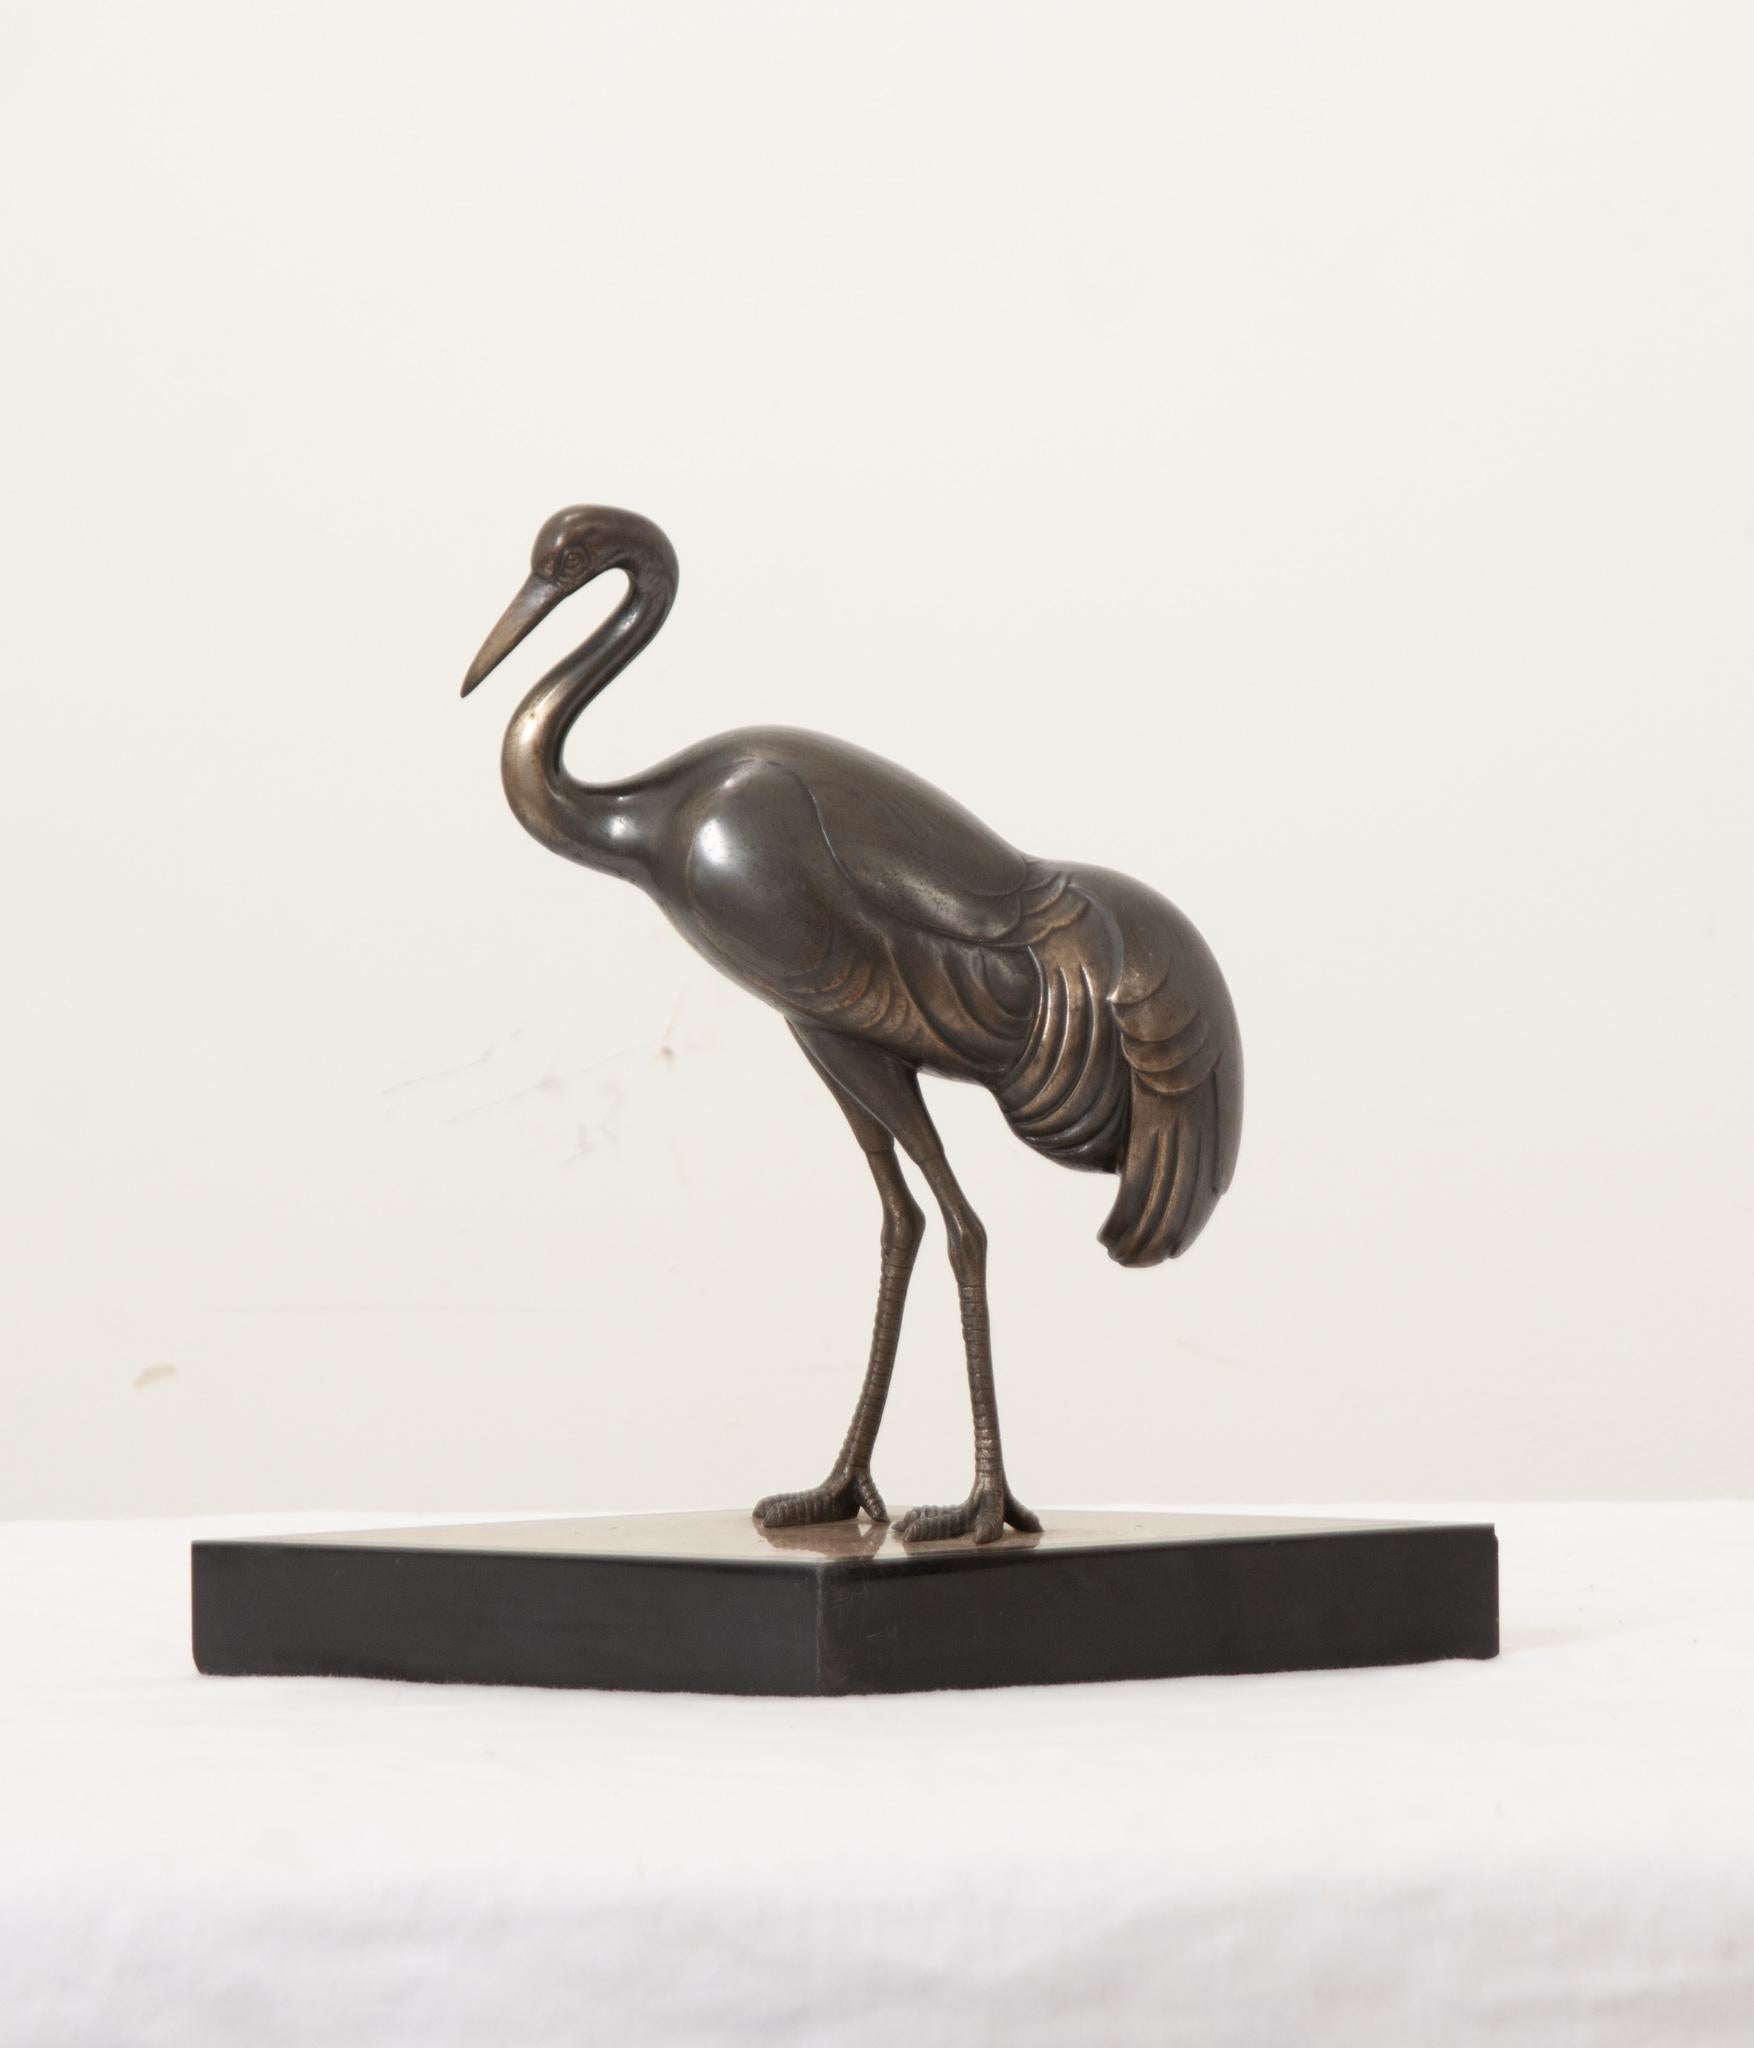 A petite statue of a bronze stork over a diamond shaped base made of travertine, surrounded in black marble. The perfect accessory to use anywhere in your interior. Be sure to view the detailed images to see the current condition of this mid-century